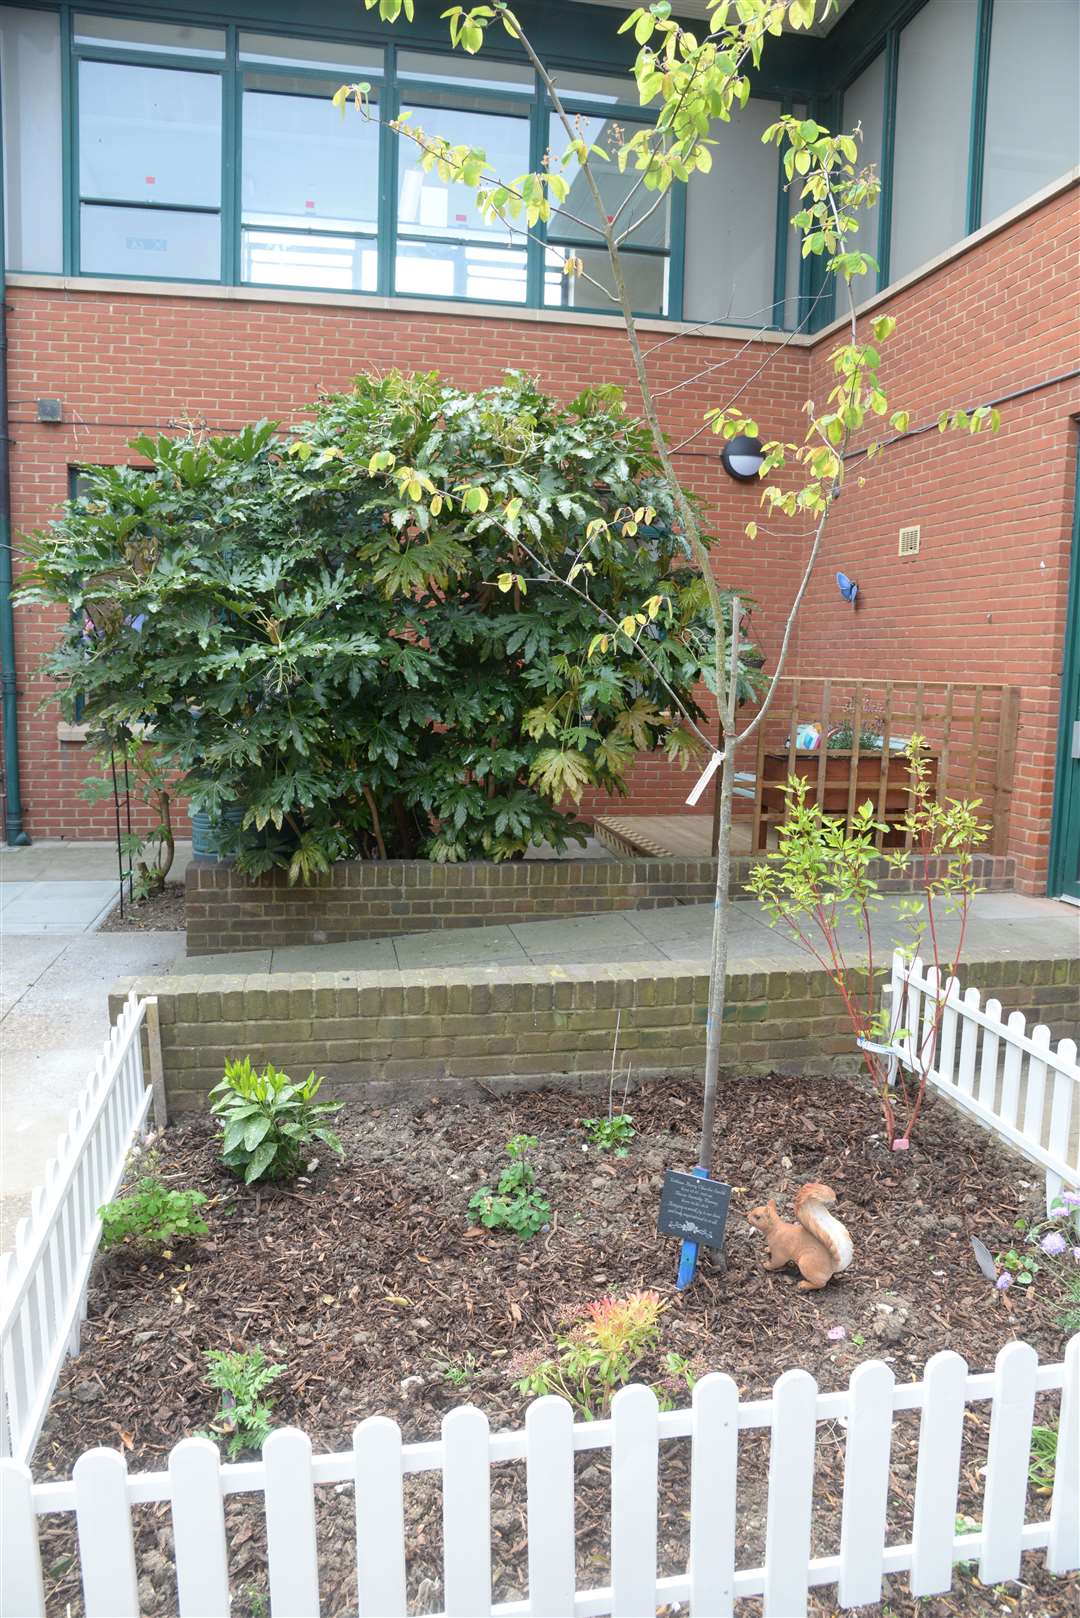 The dementia garden at the Medway Maritime Hospital after its opening on Wednesday. Picture: Chris Davey. (9488675)